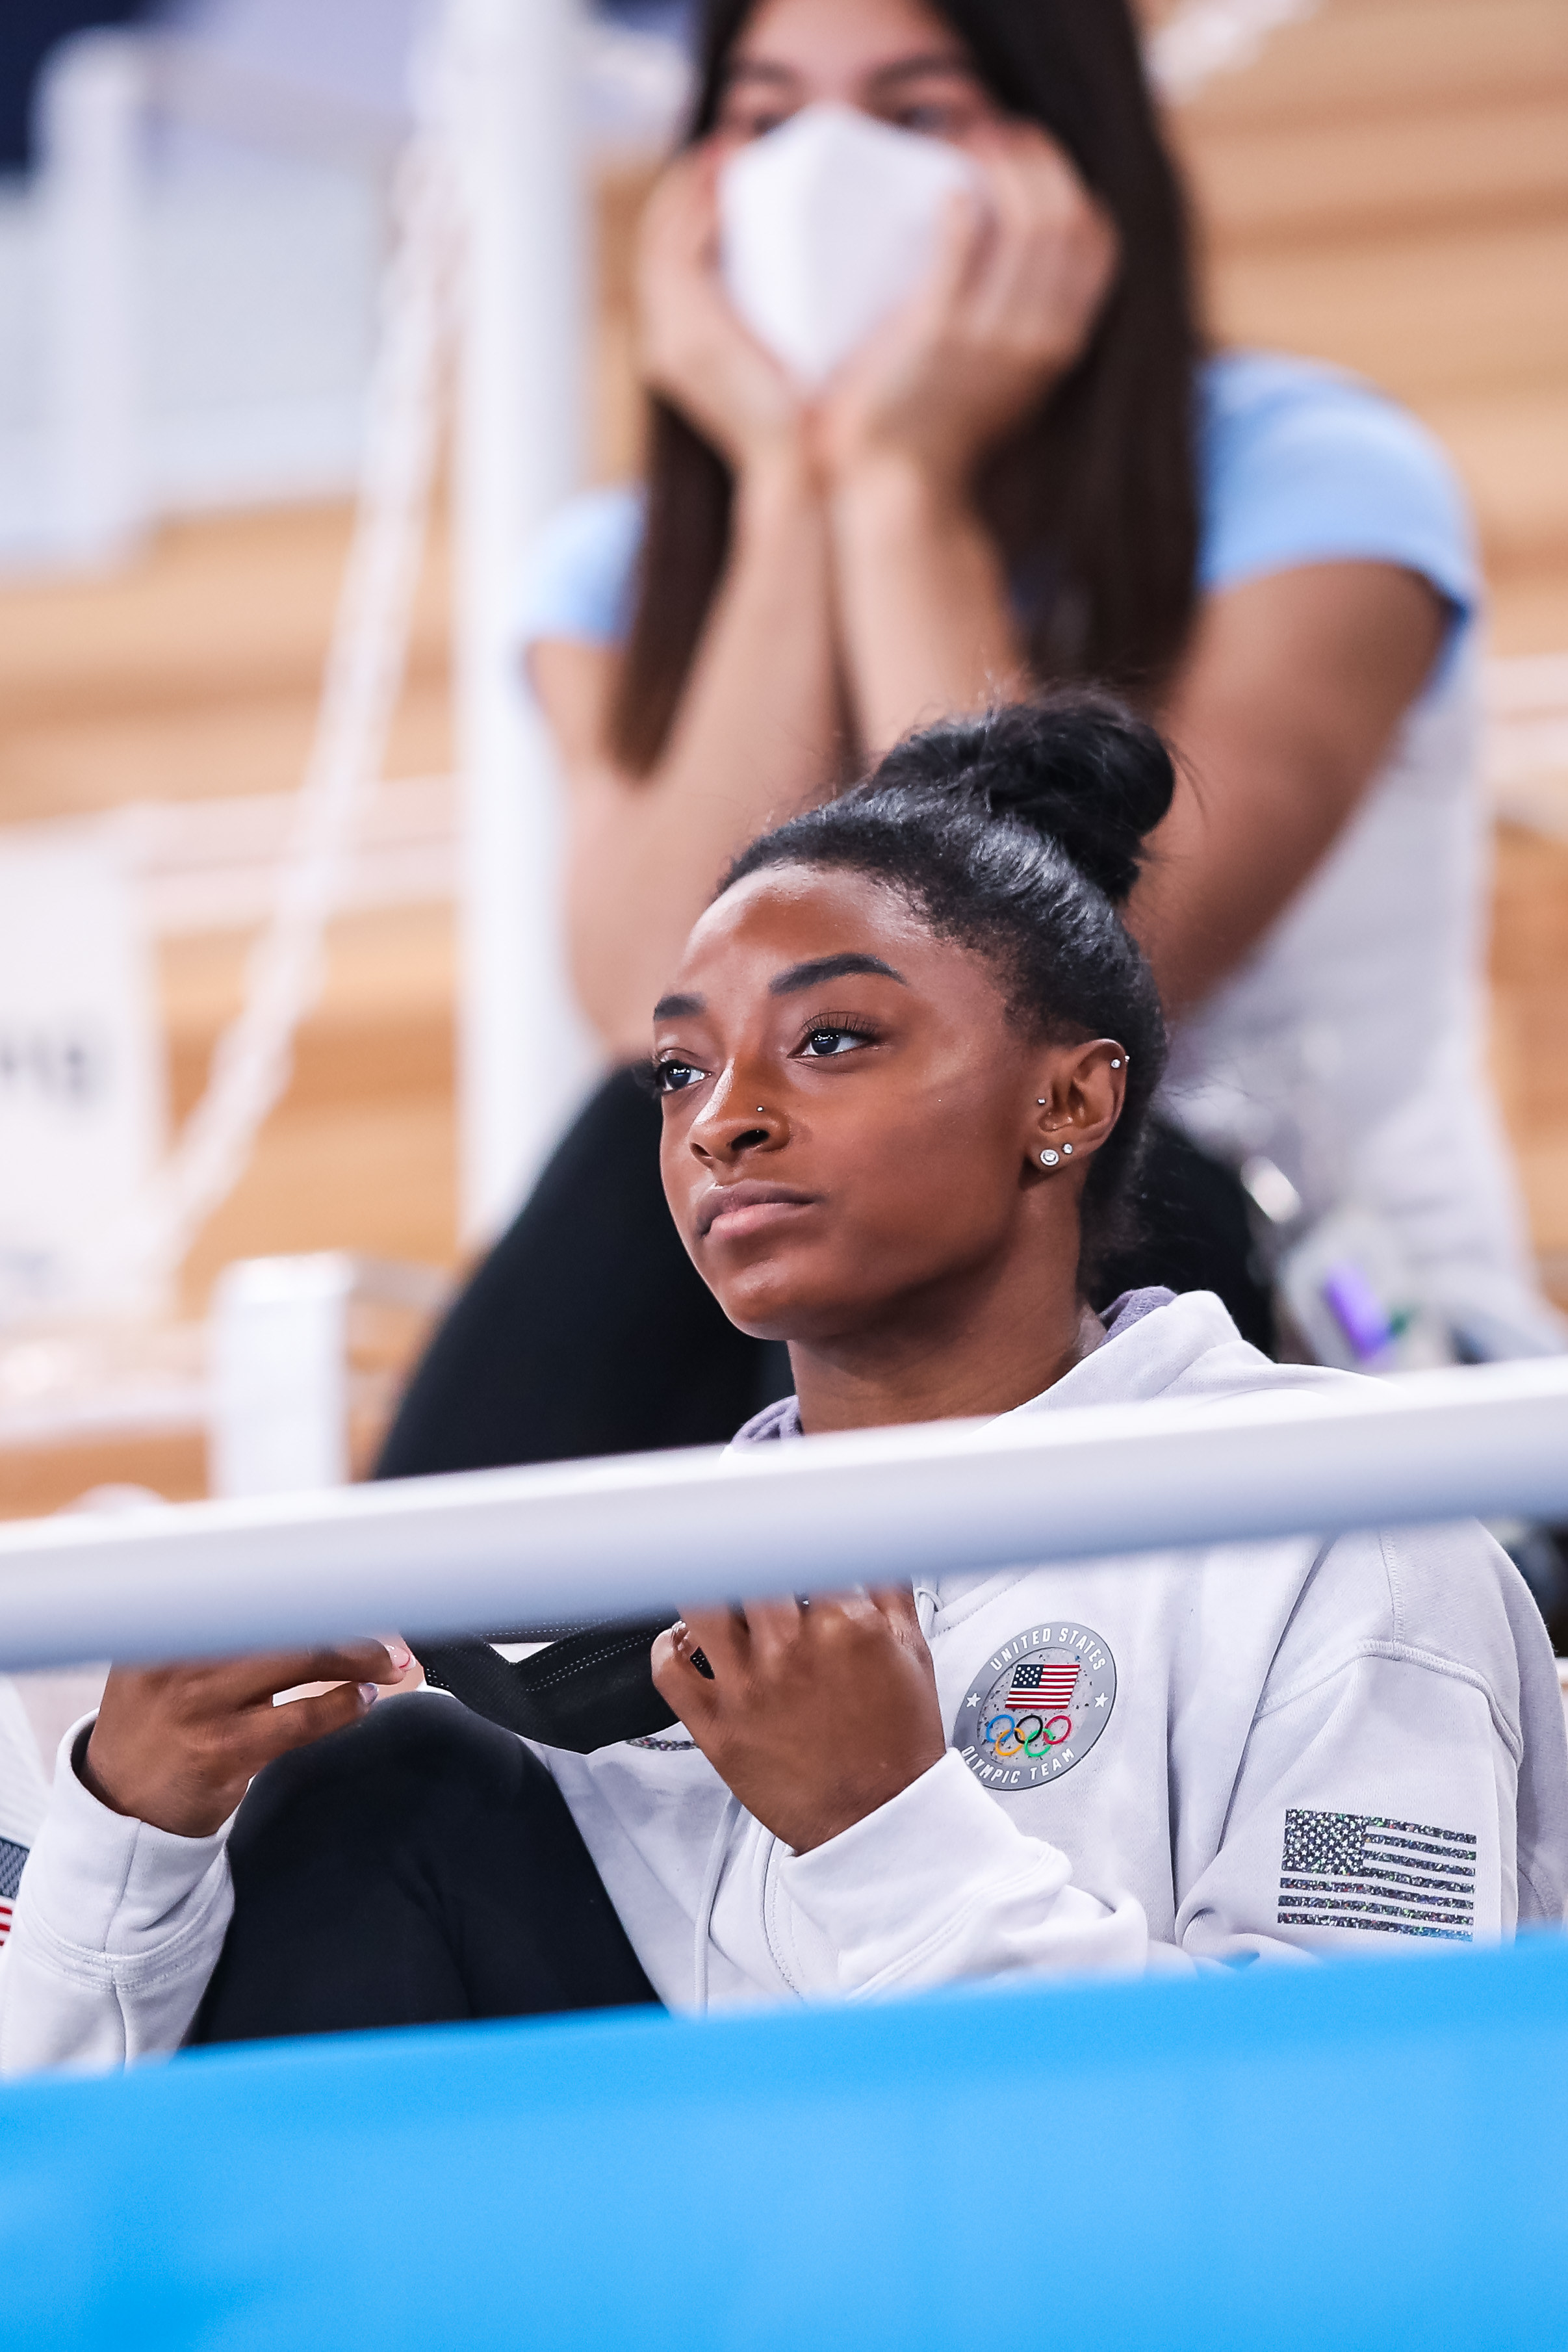 Simone Biles in the stands at the Olympics